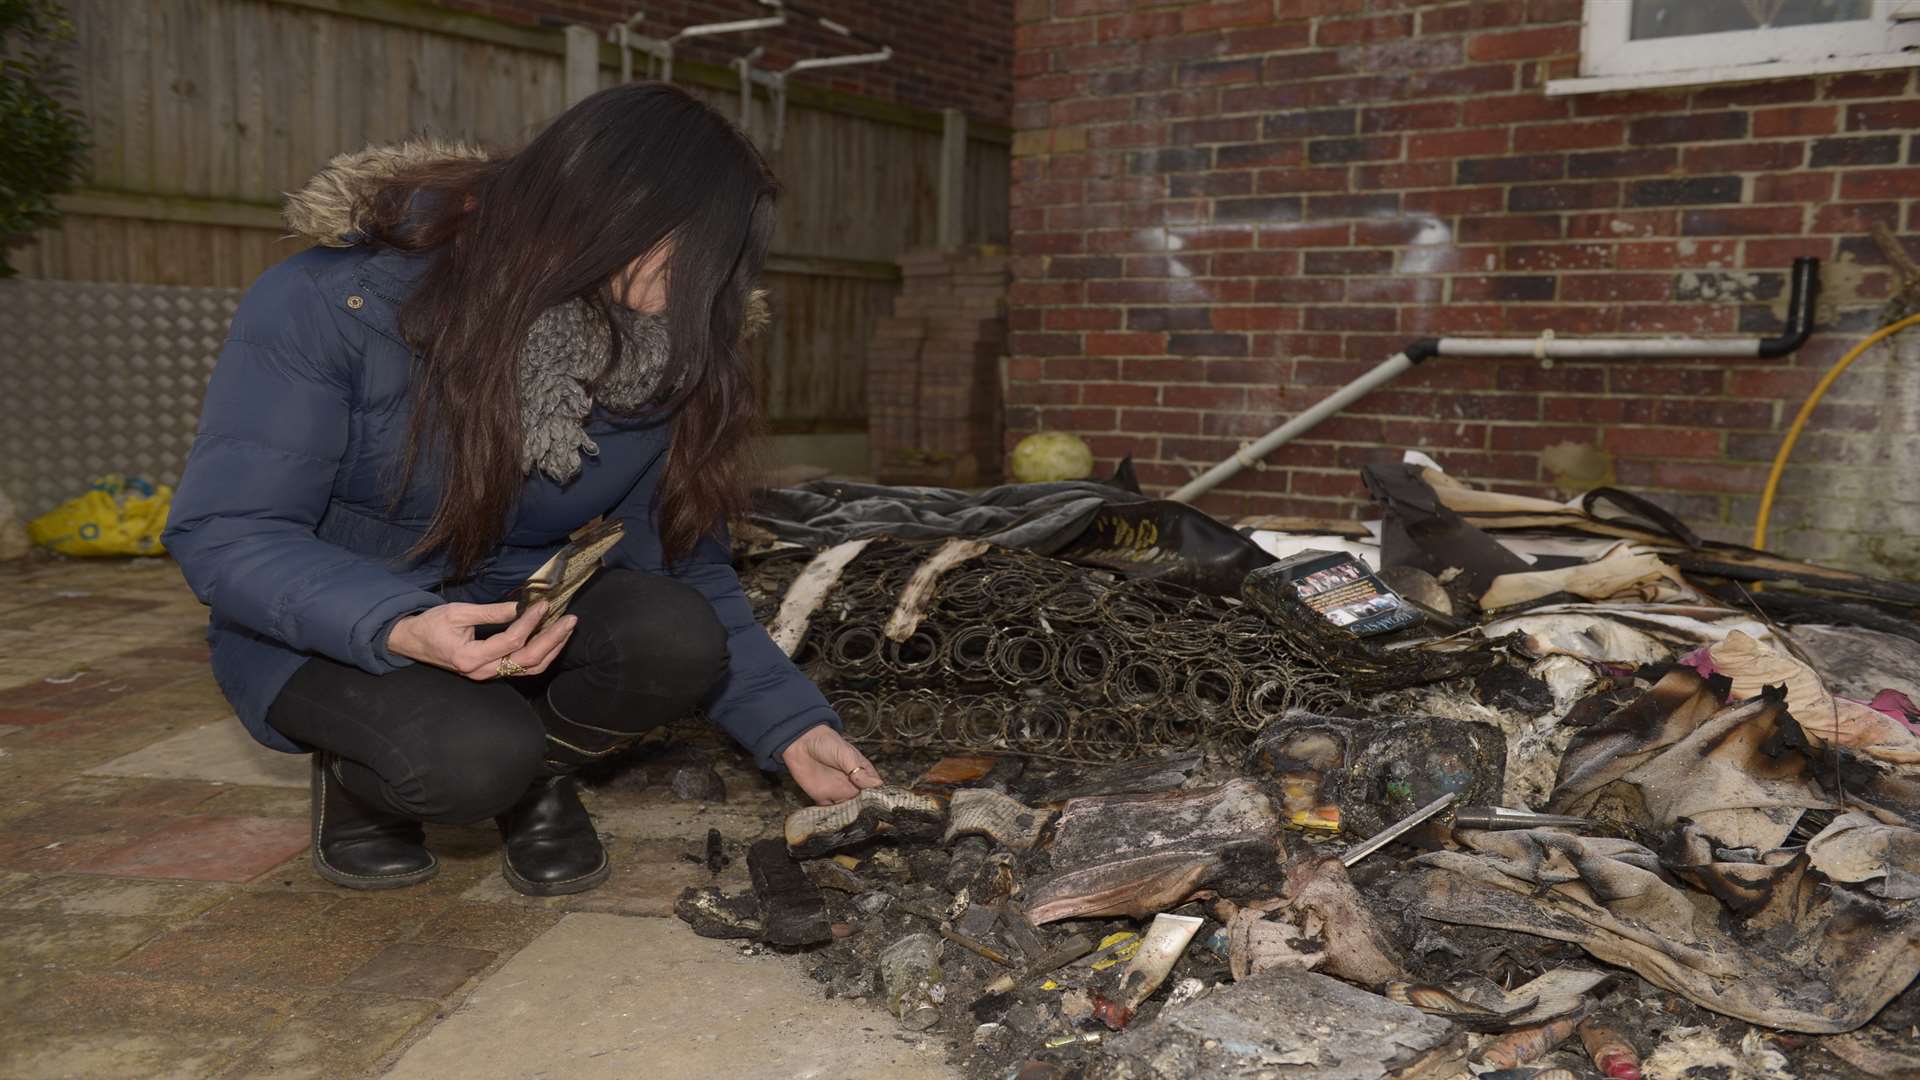 Jamie with items damaged in the fire at her Sturry home